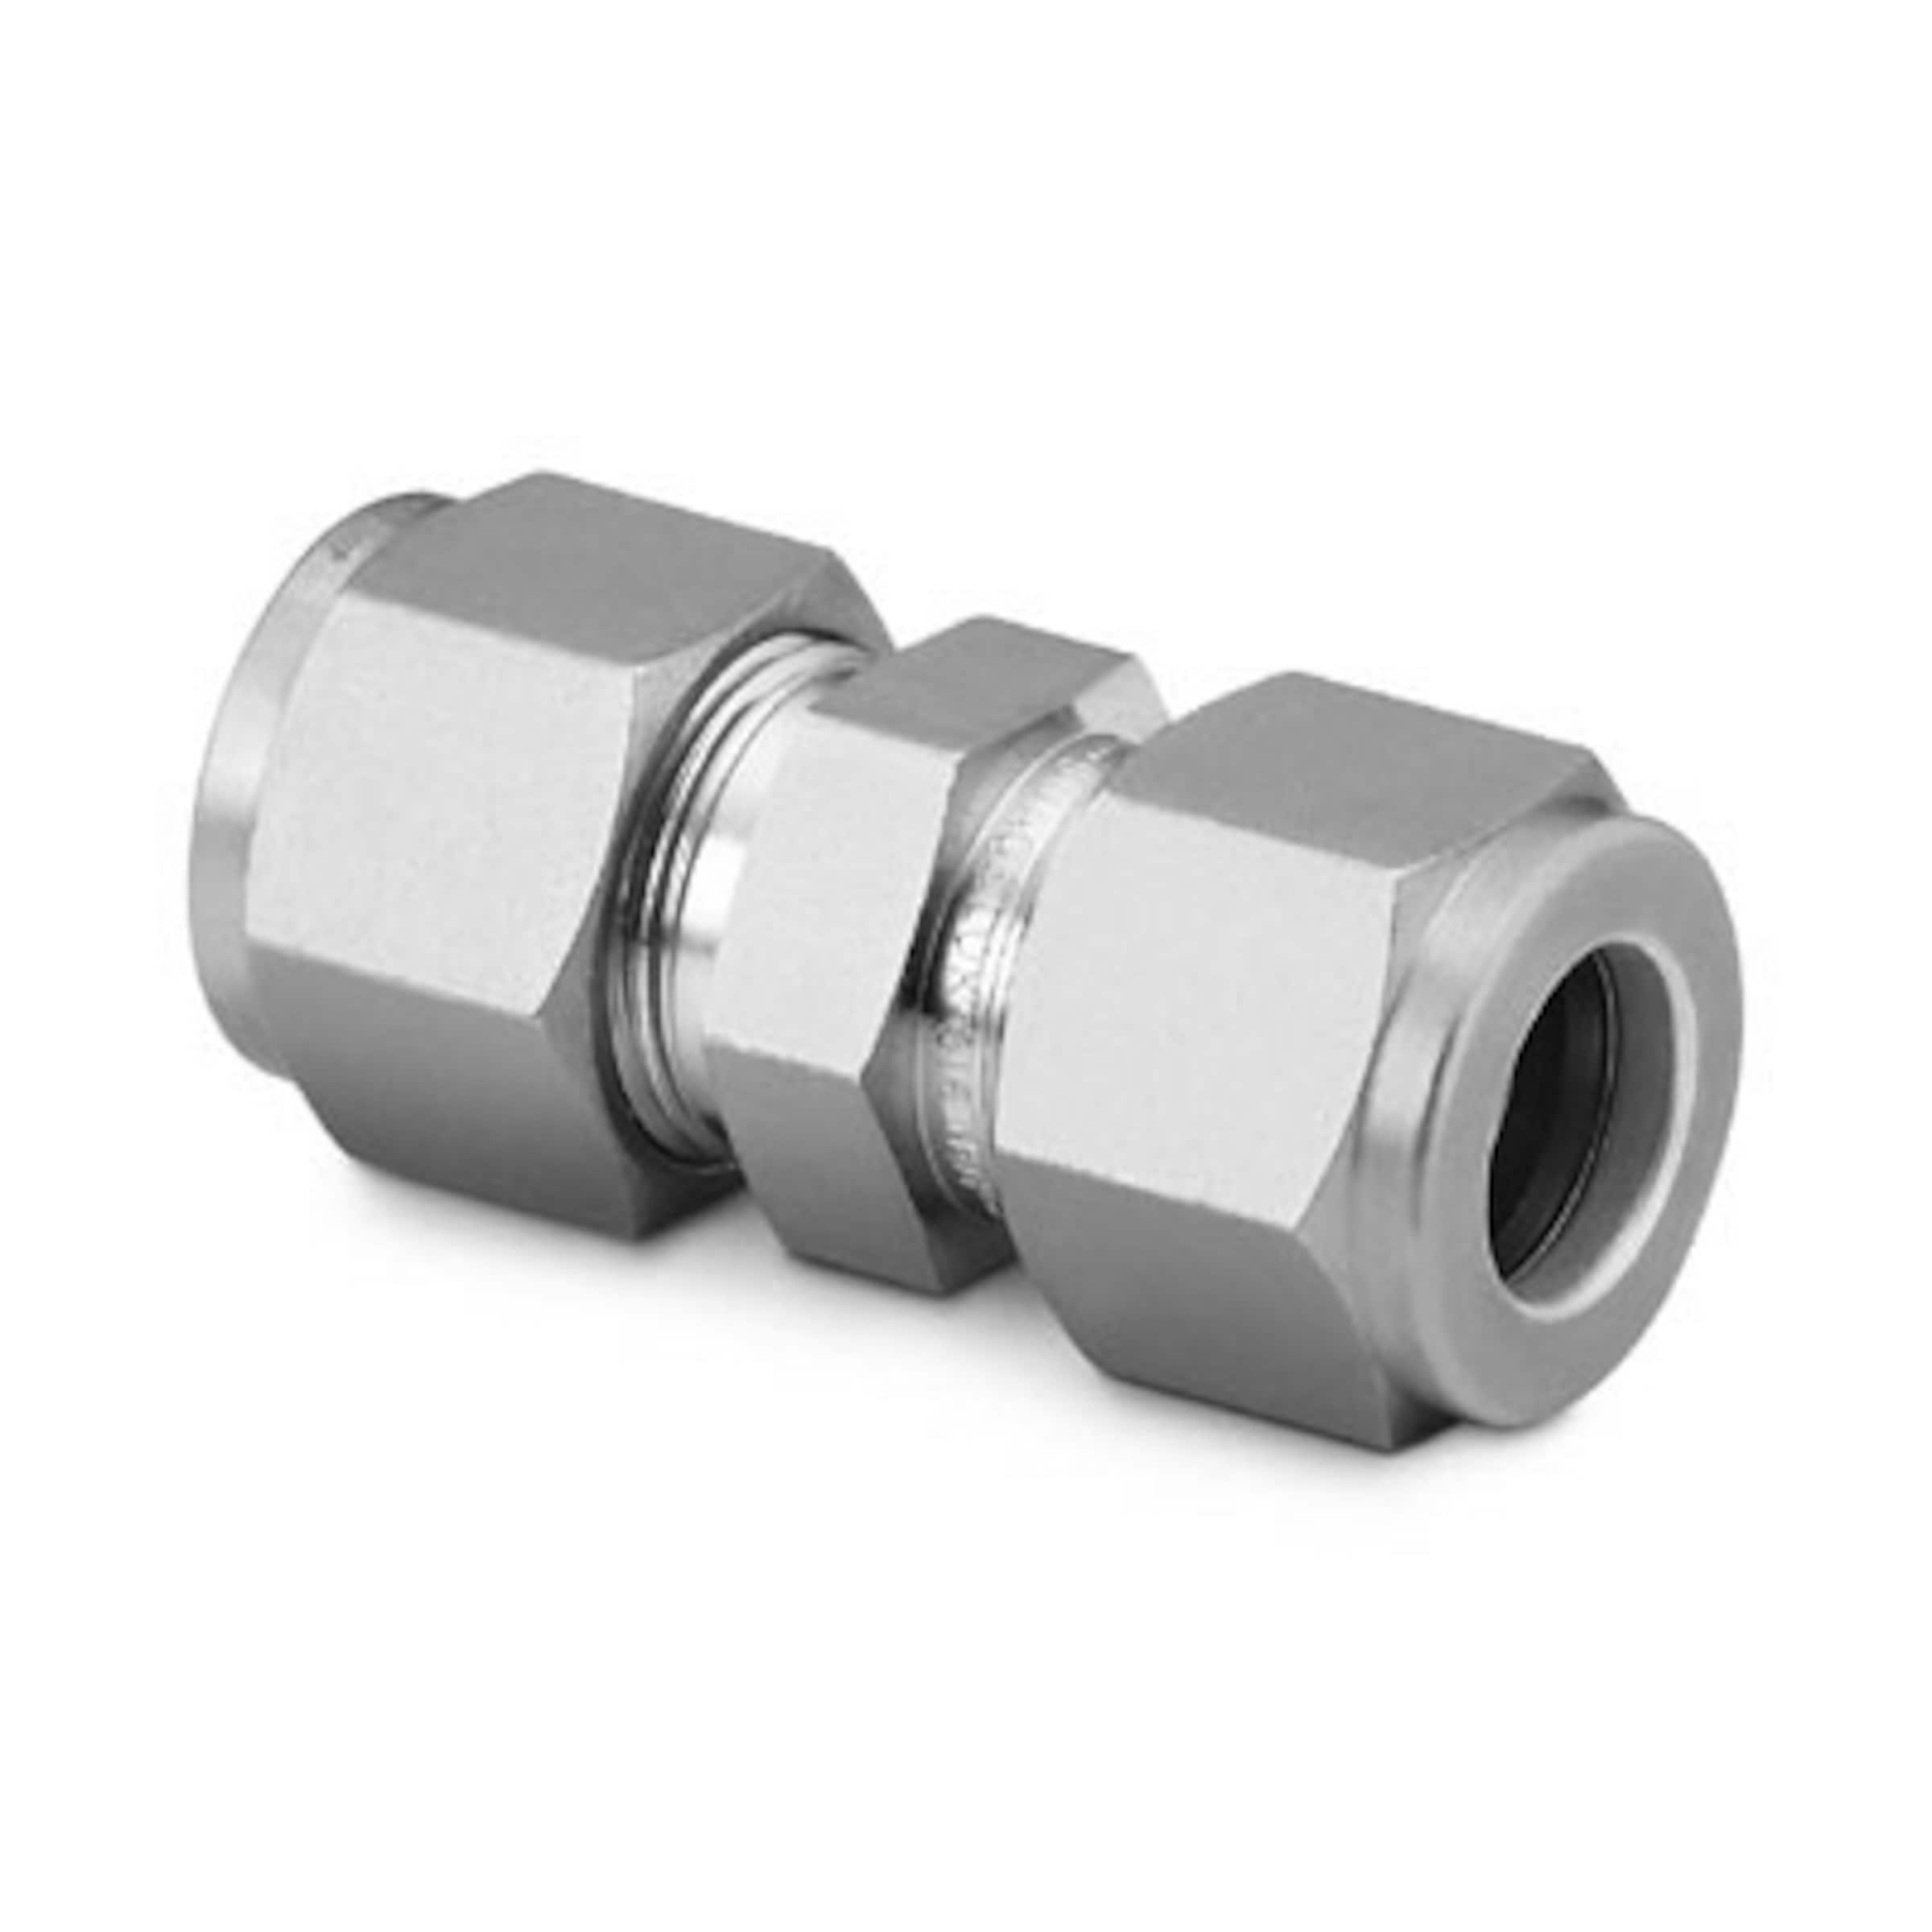 Stainless Steel Swagelok Tube Fitting, Union, 1/2 in. Tube OD, Unions, Tube Fittings and Adapters, Fittings, All Products